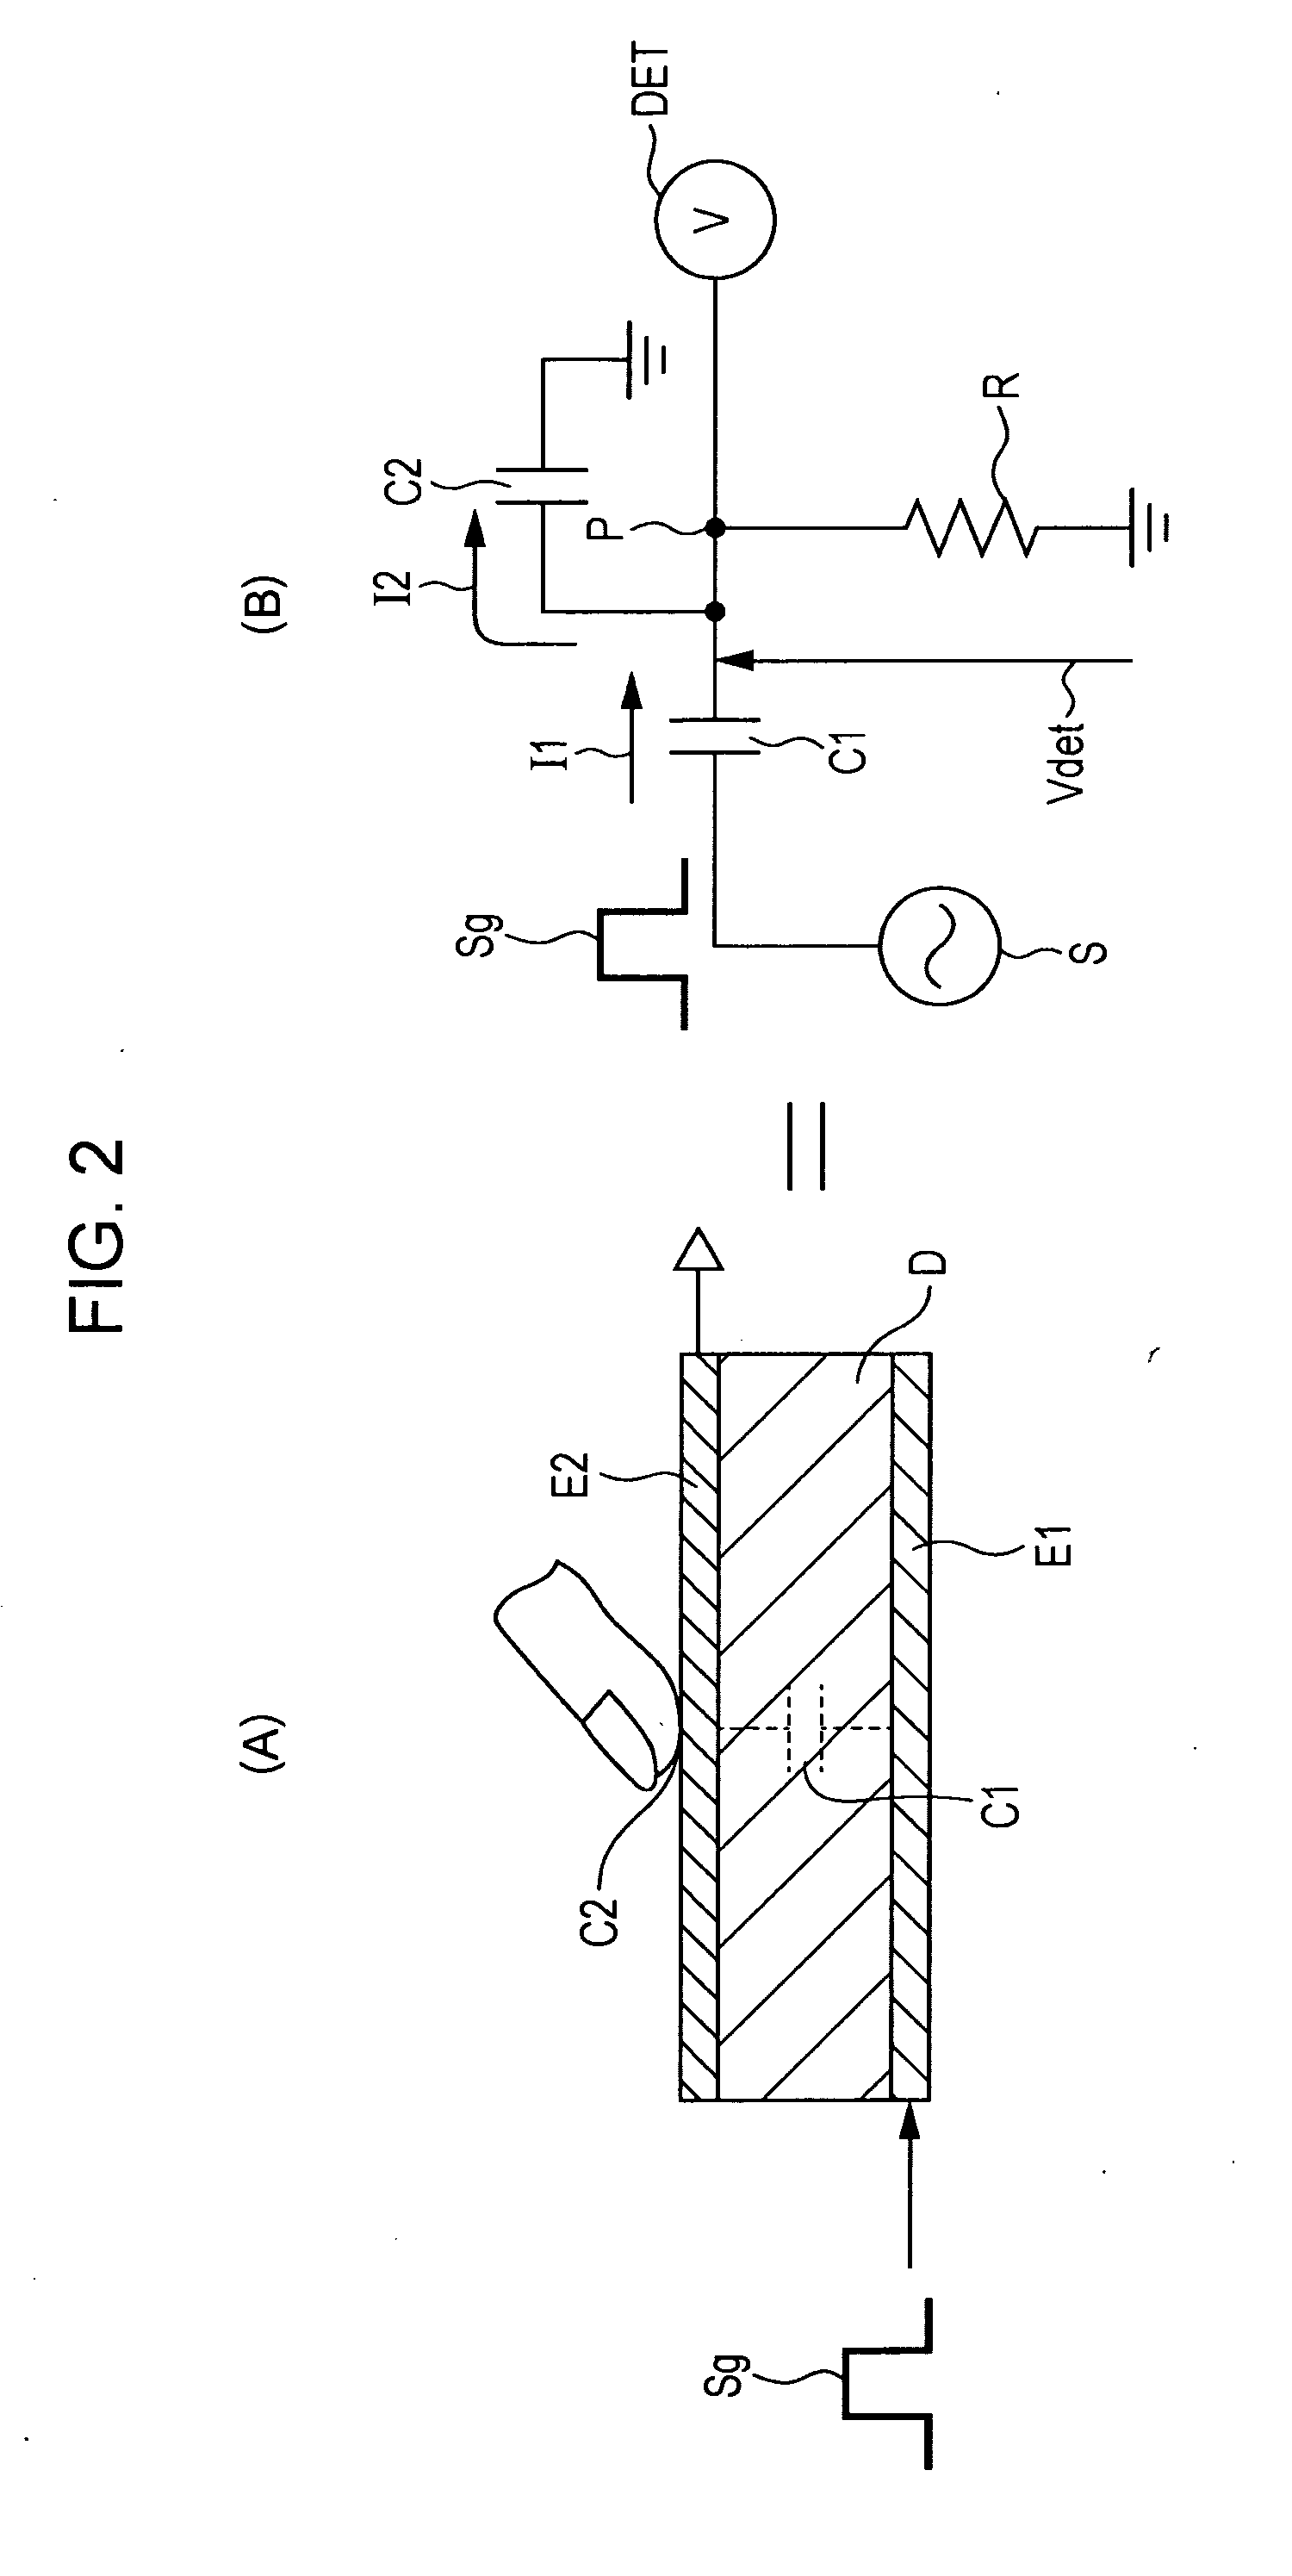 Display apparatus with touch detection function, drive circuit, method of driving display apparatus with touch detection function, and electronic devices